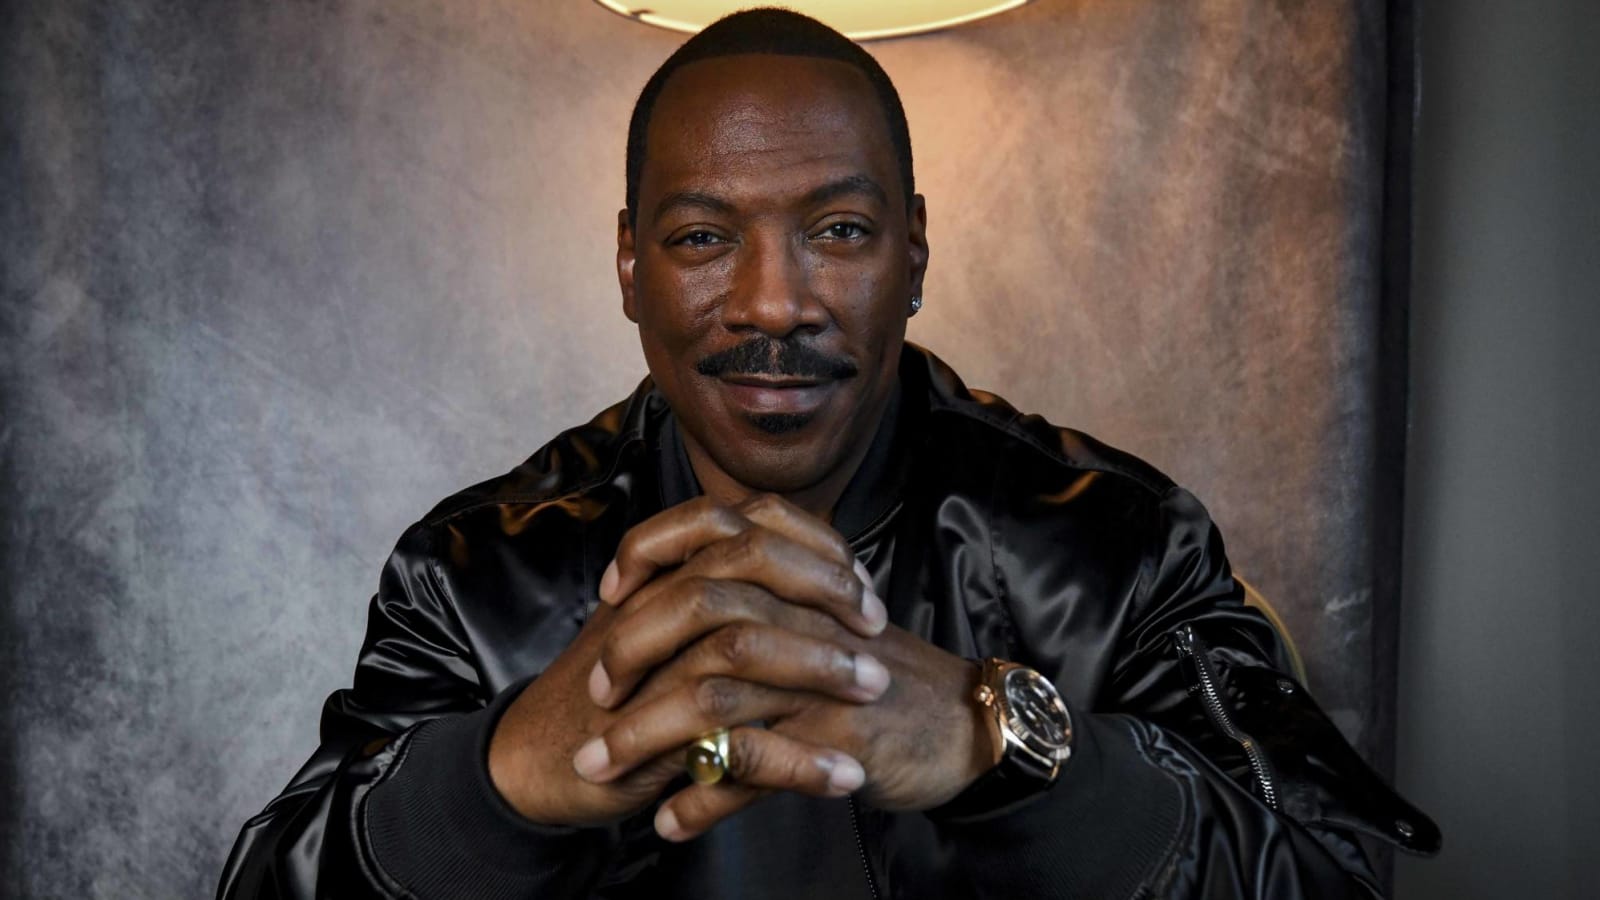 ‘Beverly Hills Cop 4’ is reportedly closer to filming